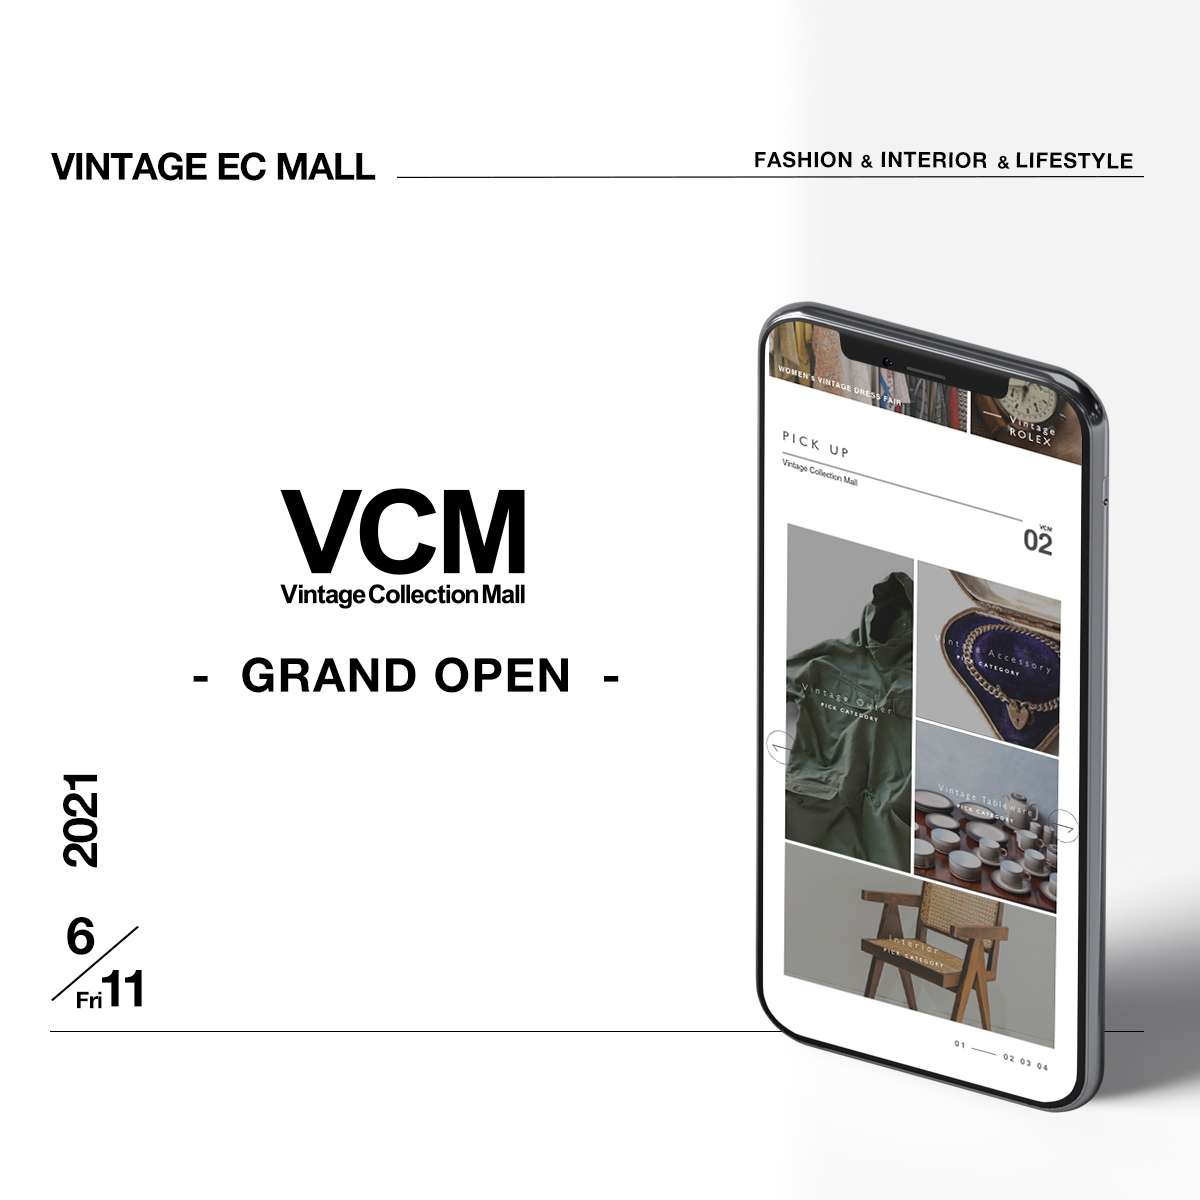 VCM -Vintage Collection Mall-出店のお知らせ